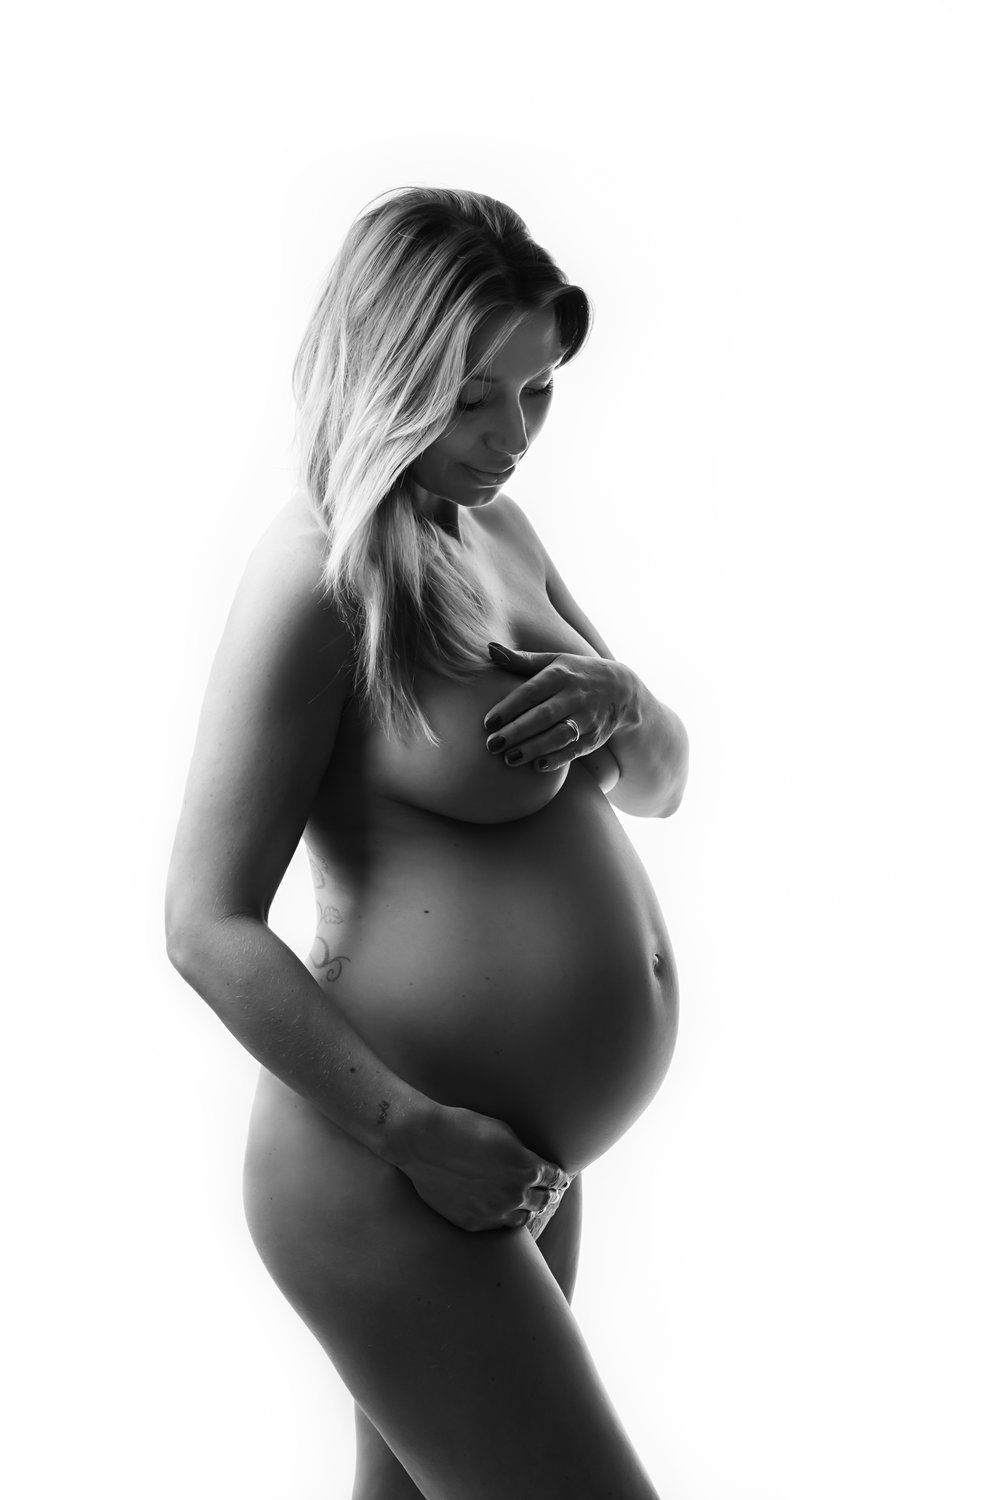 Nude in pregnancy photoshoot